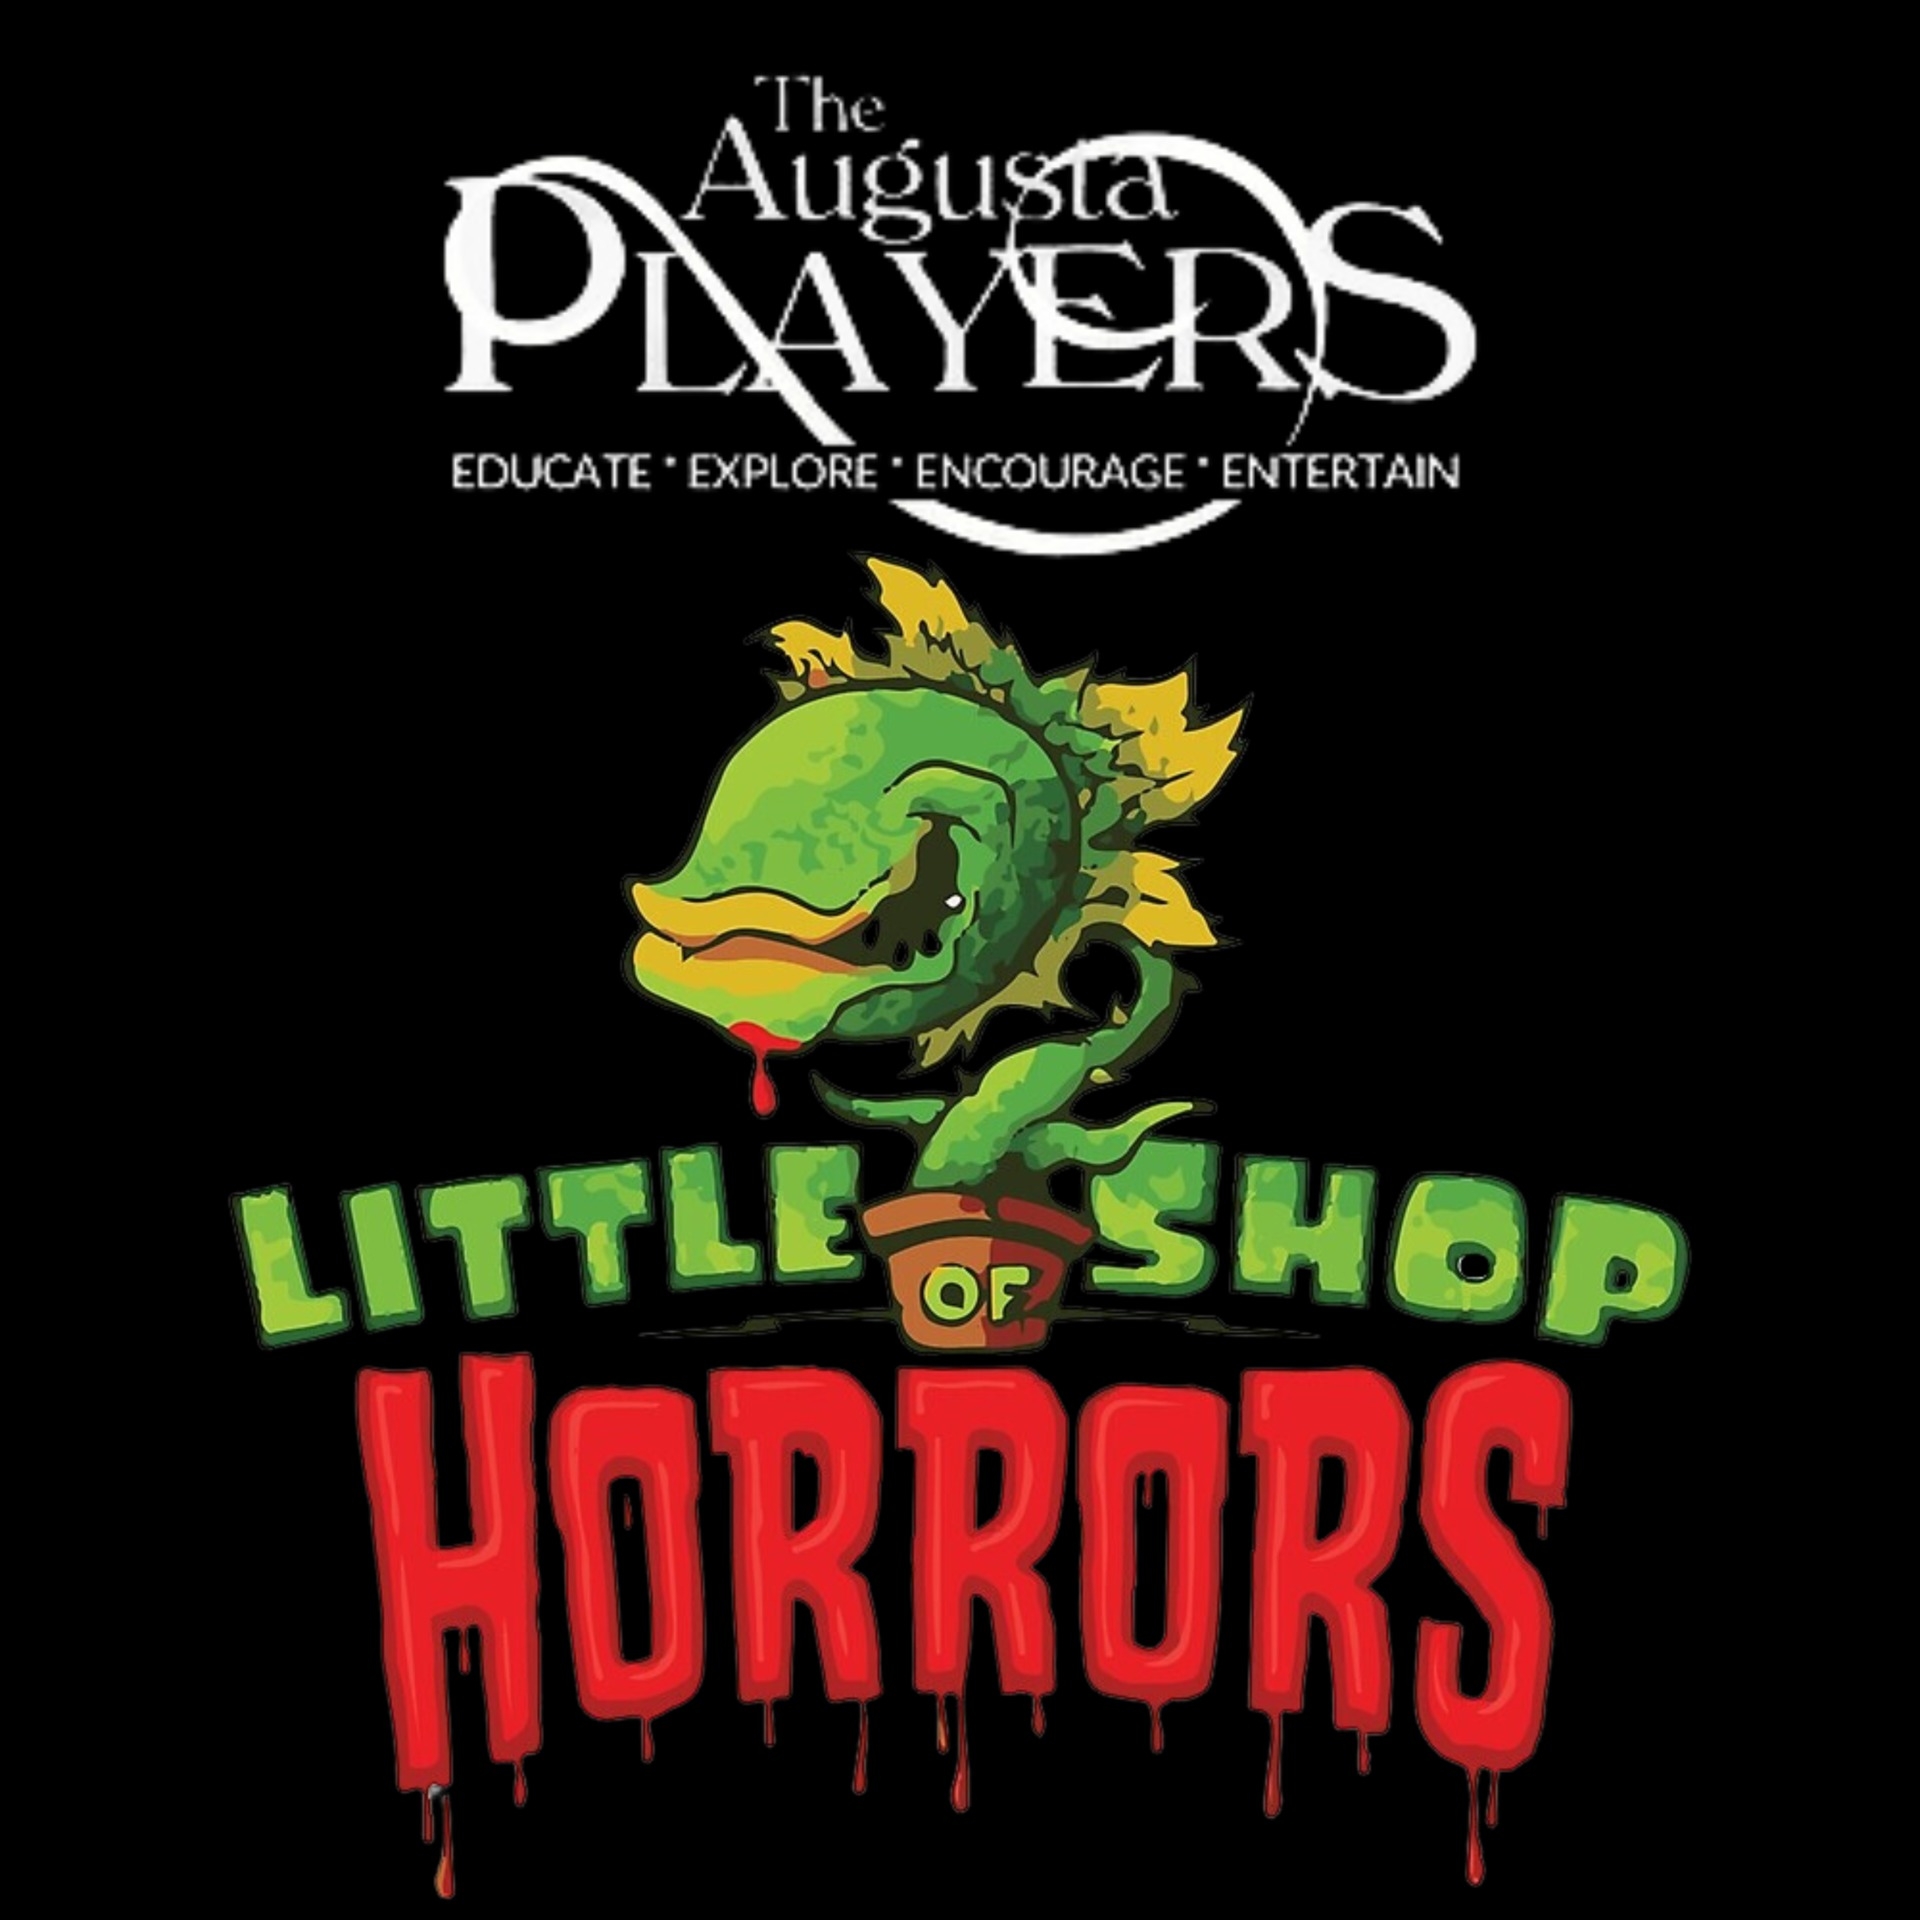 Augusta Players Little Shop of Horrors